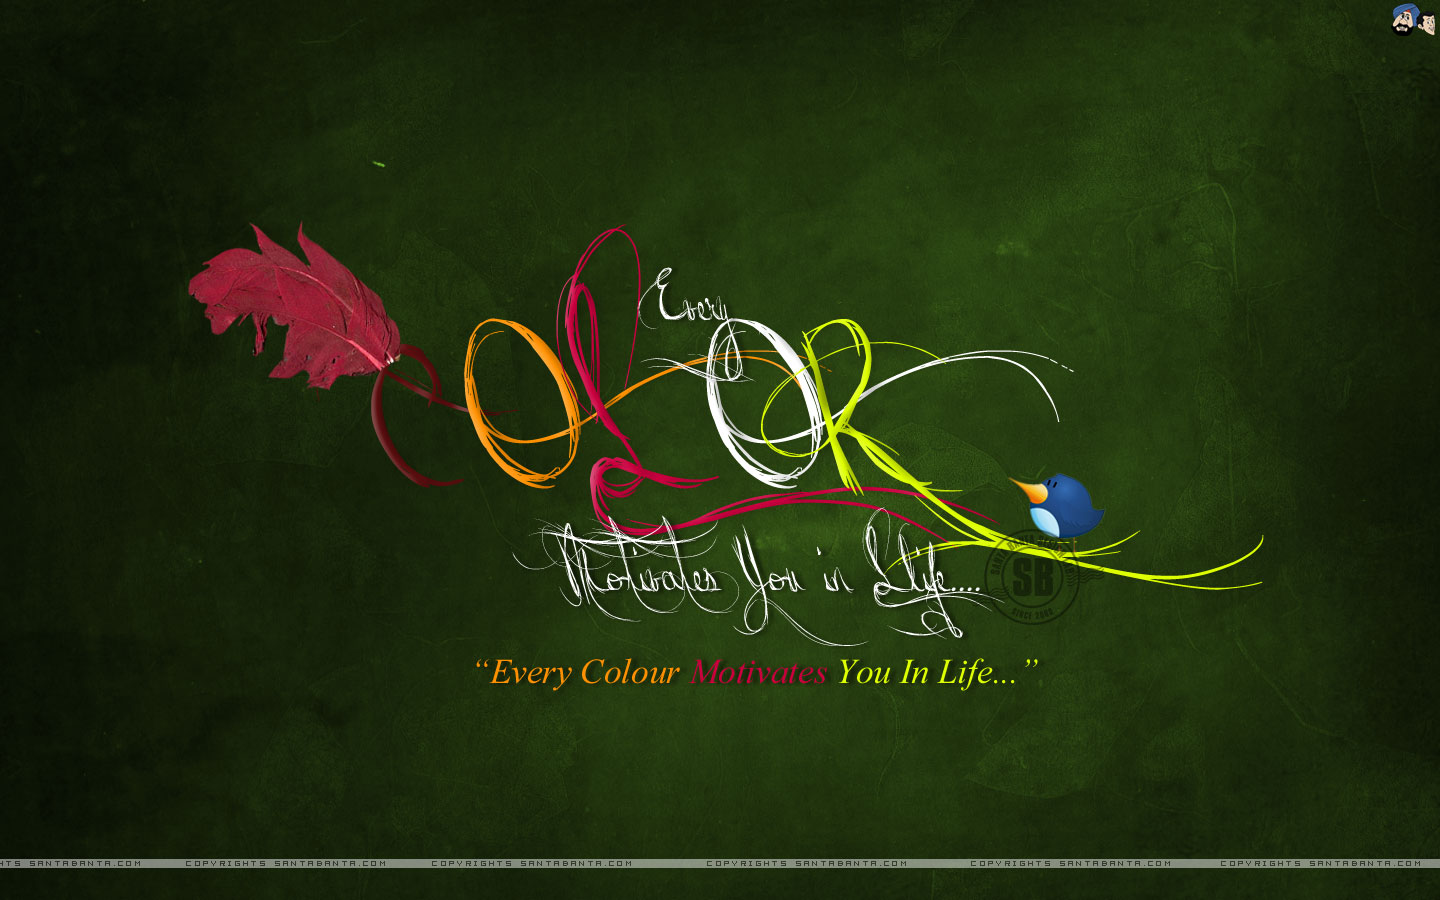 Motivational Wallpaper On Colors Every Color Motivates You In